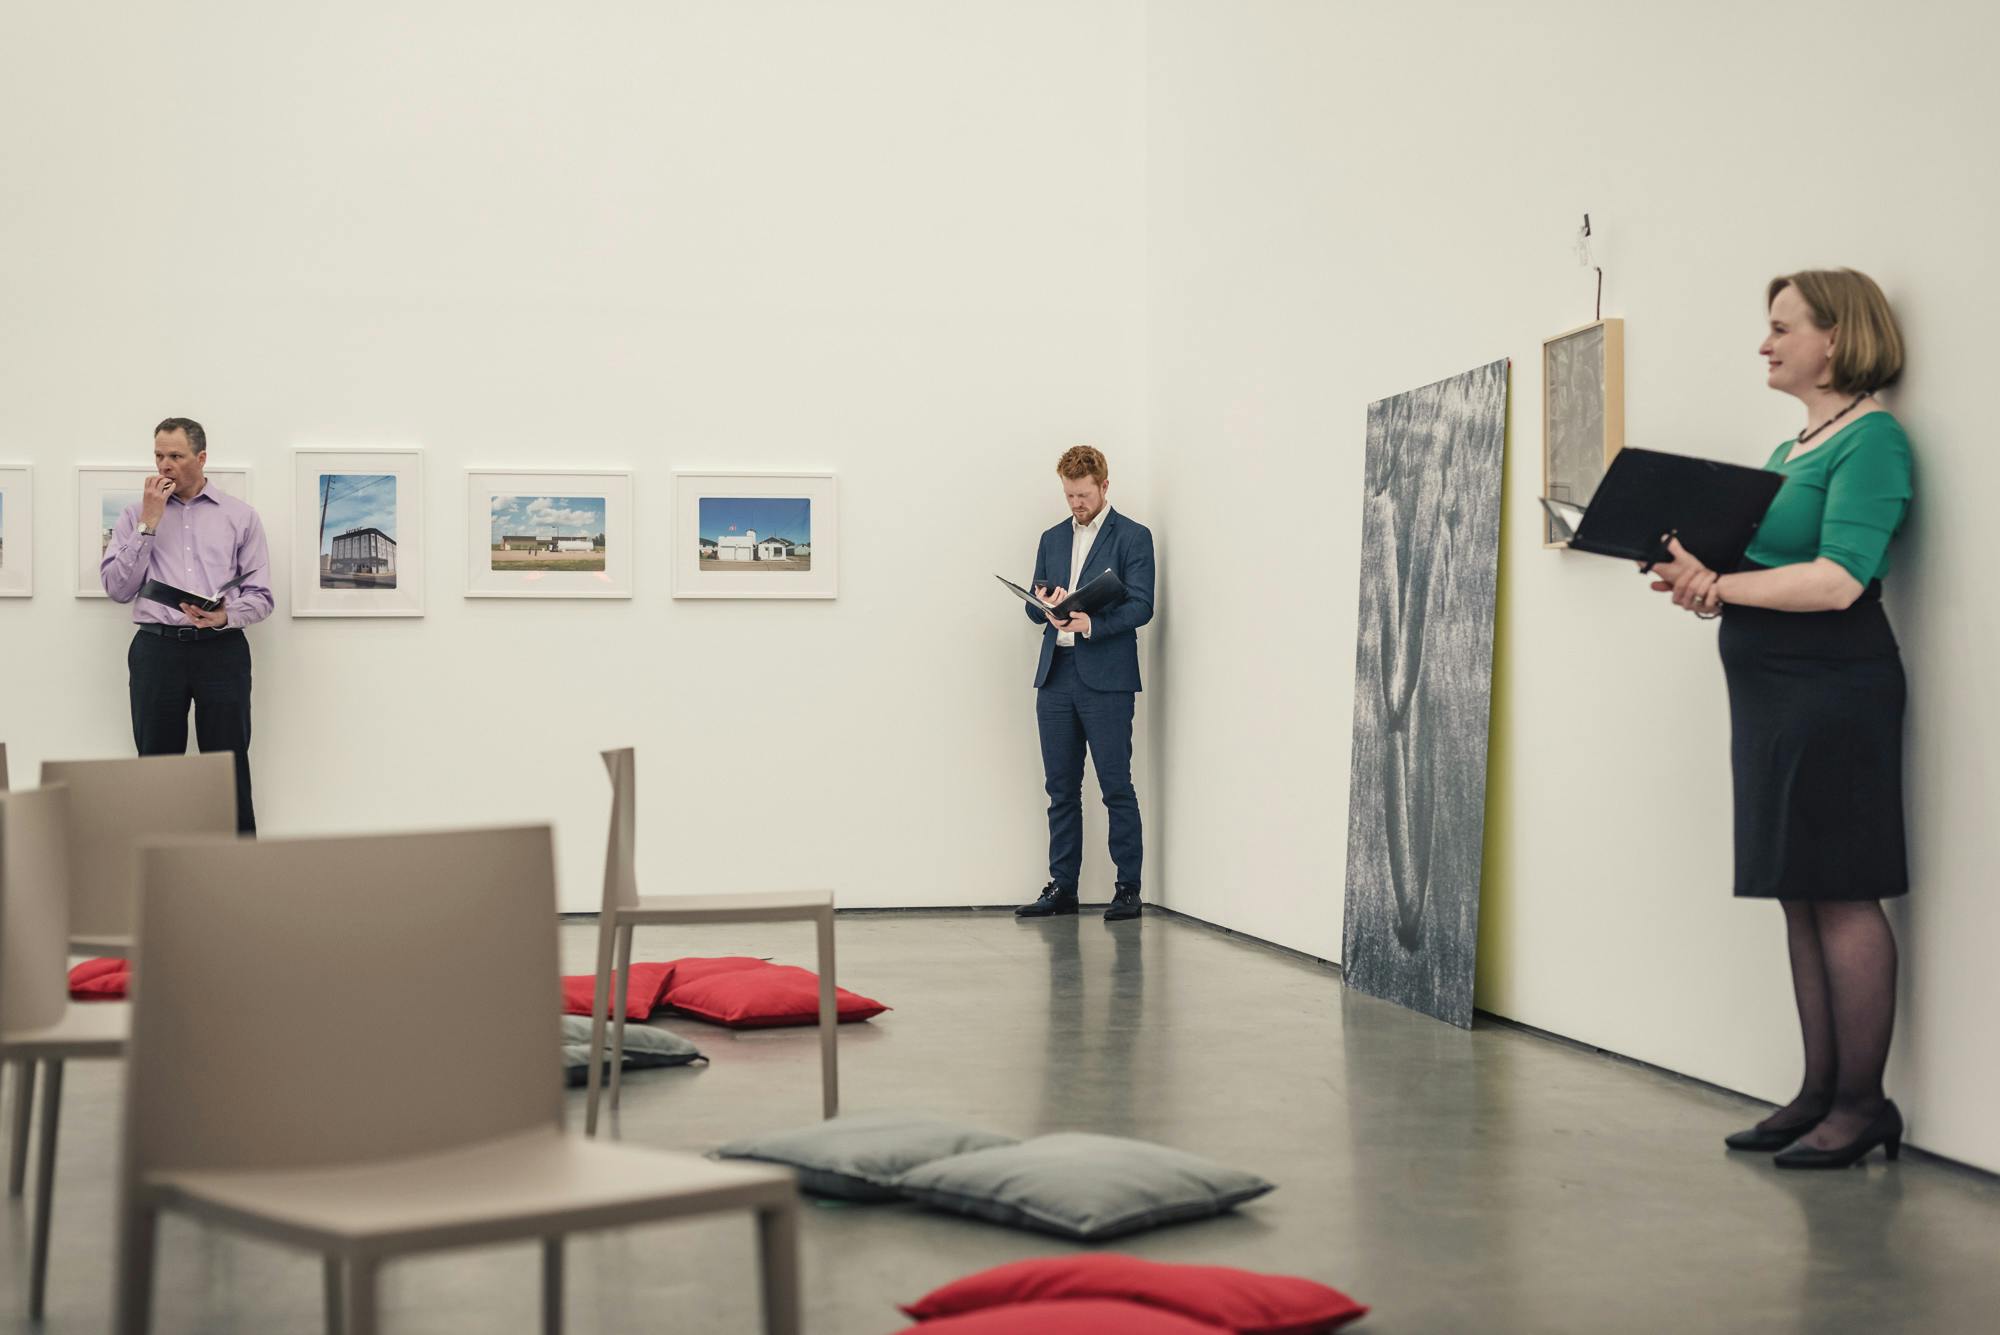 An image of people standing apart in a gallery, interspersed by artworks on the wall. They are holding books. Some chairs are placed in the middle of the gallery facing performers. 